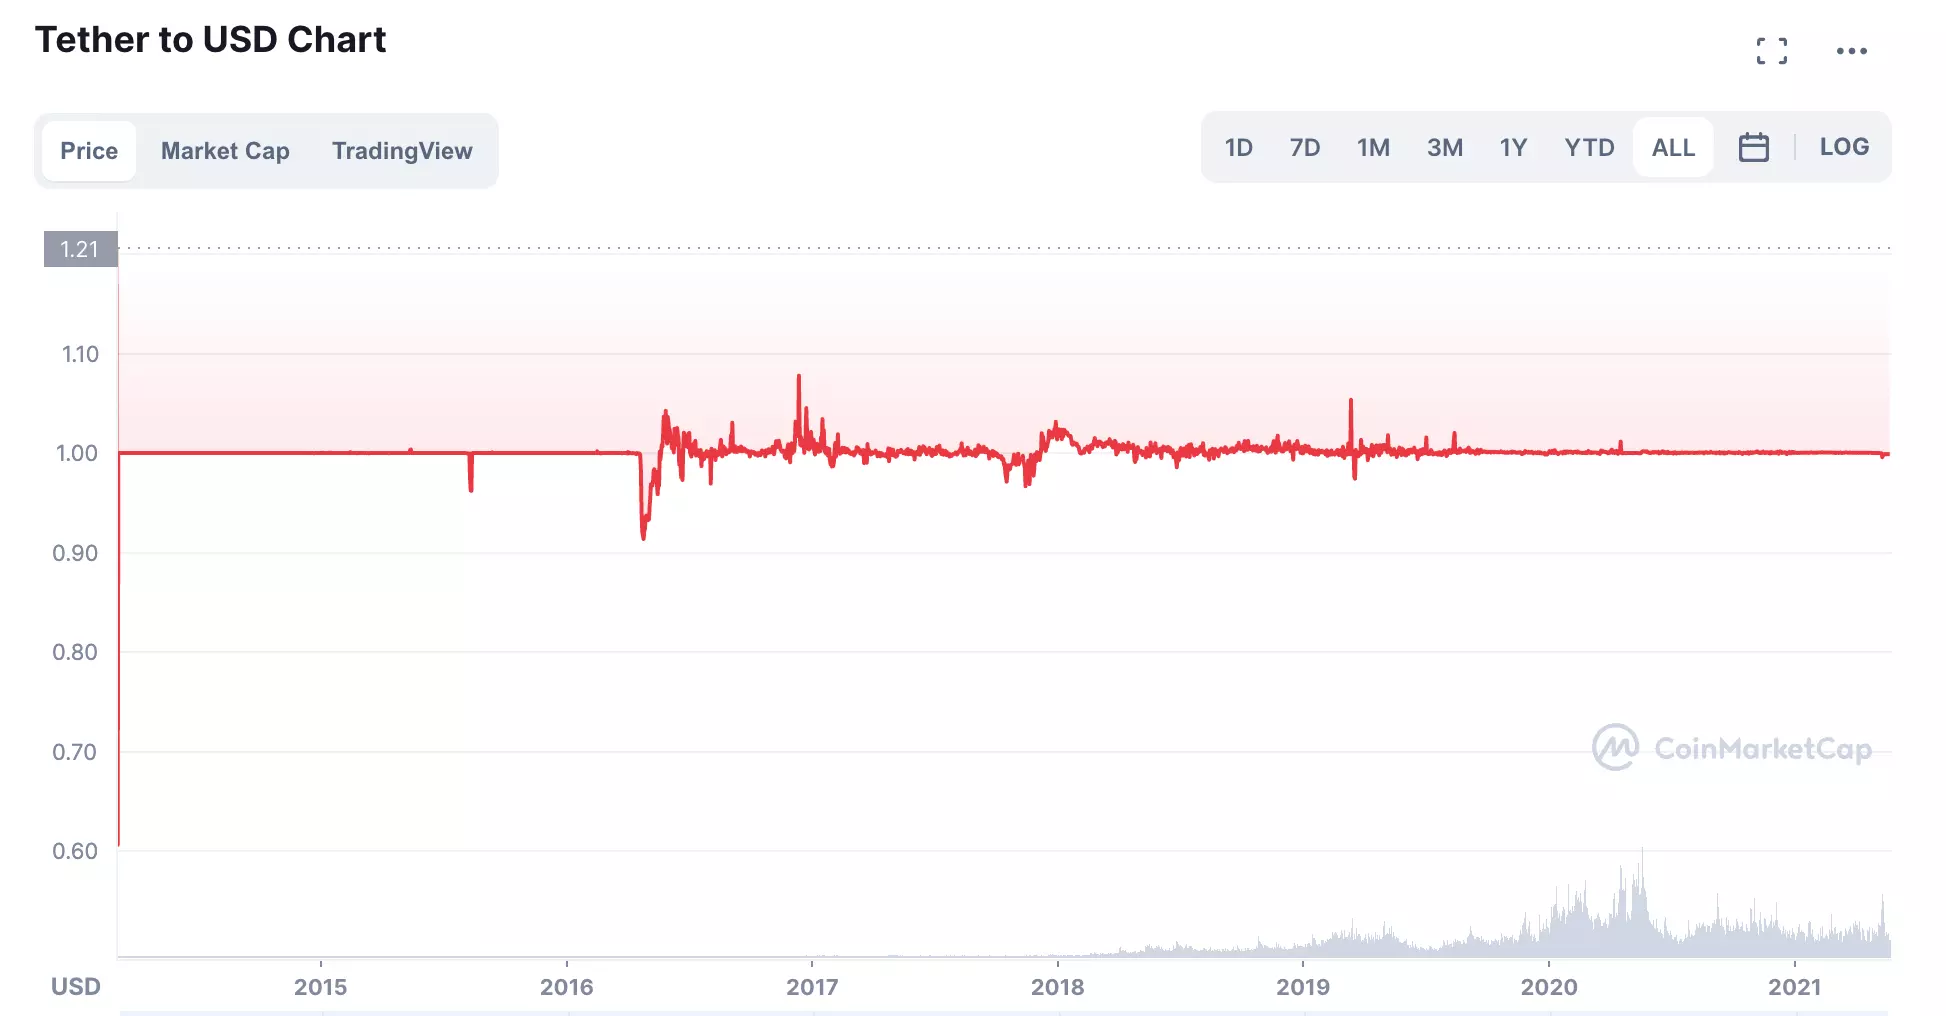 TerraUSD Collapses, Tether Holds As Stablecoins Suddenly Become Unstable